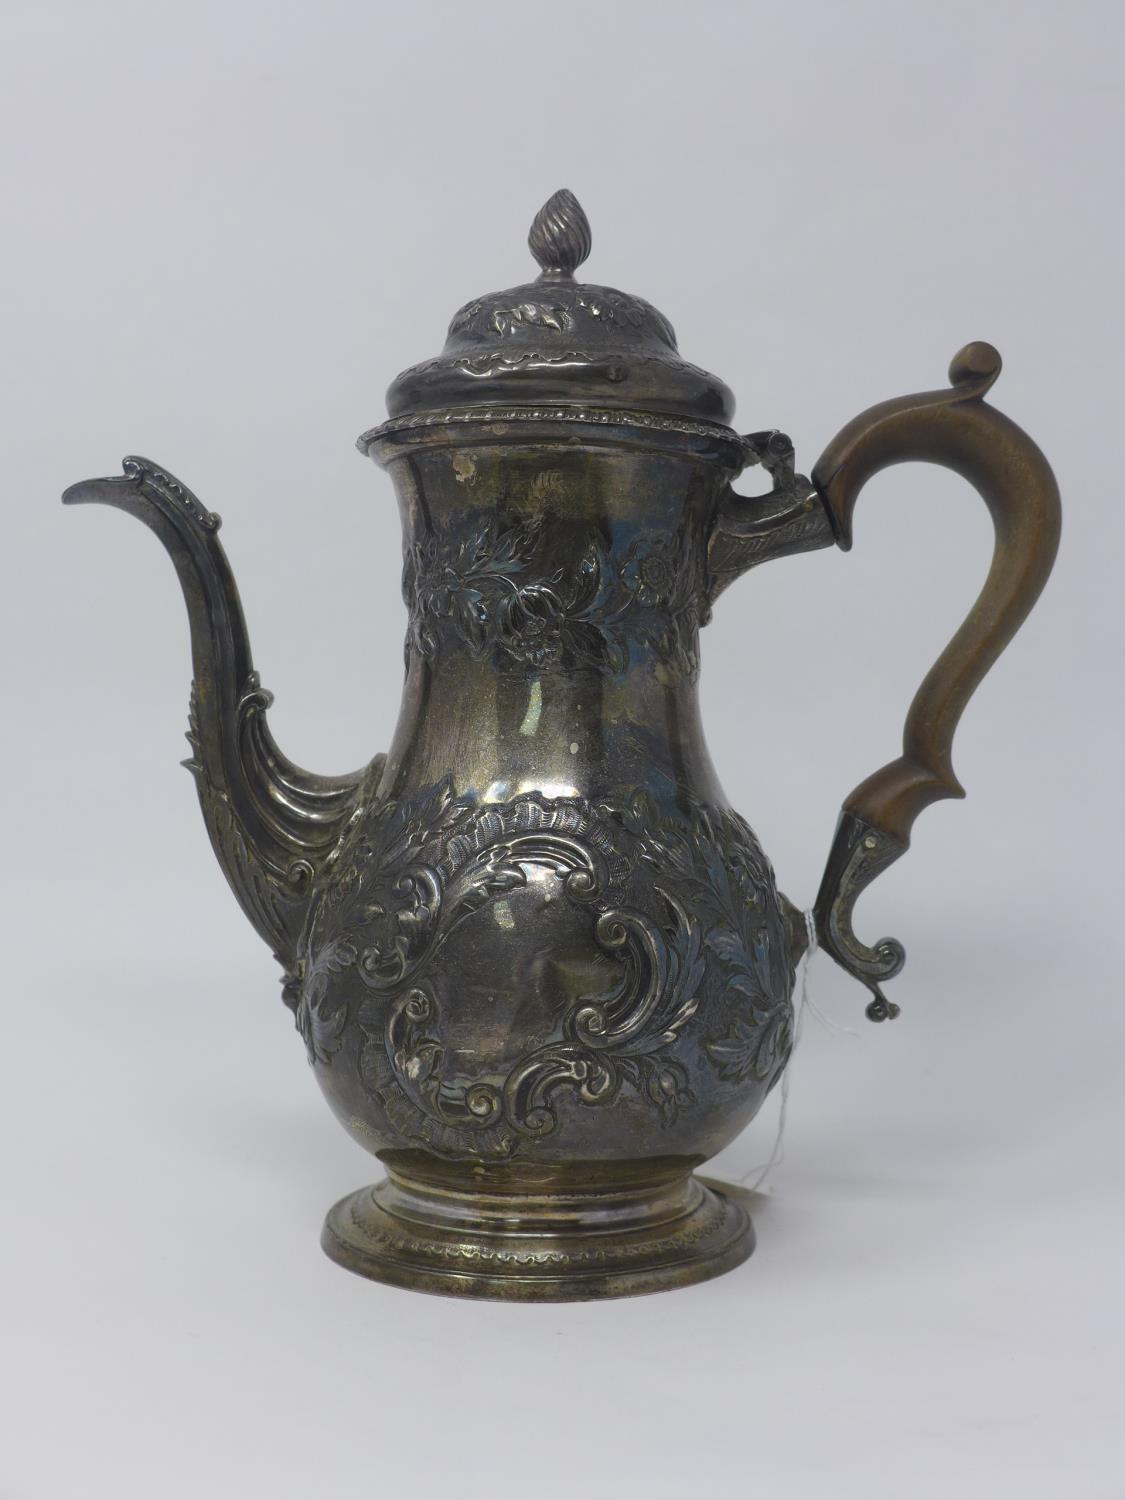 WITHDRAWN - A George III silver tea pot with embossed floral decoration, dated 1762, H.25cm, 25oz - Image 3 of 4